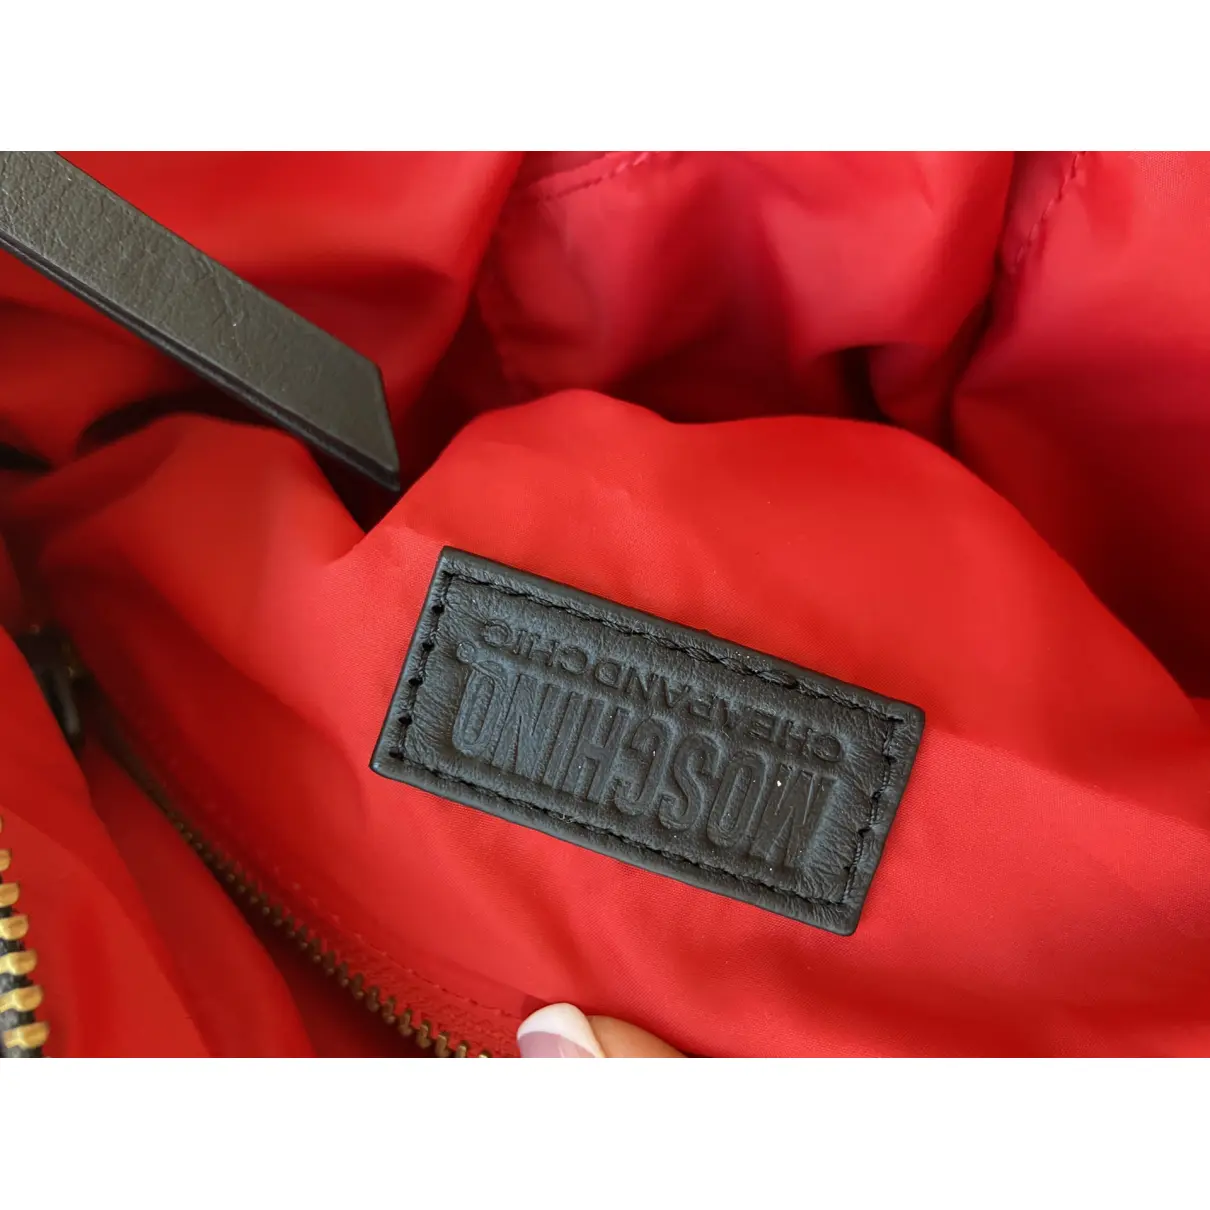 Buy Moschino Cheap And Chic Cloth bag online